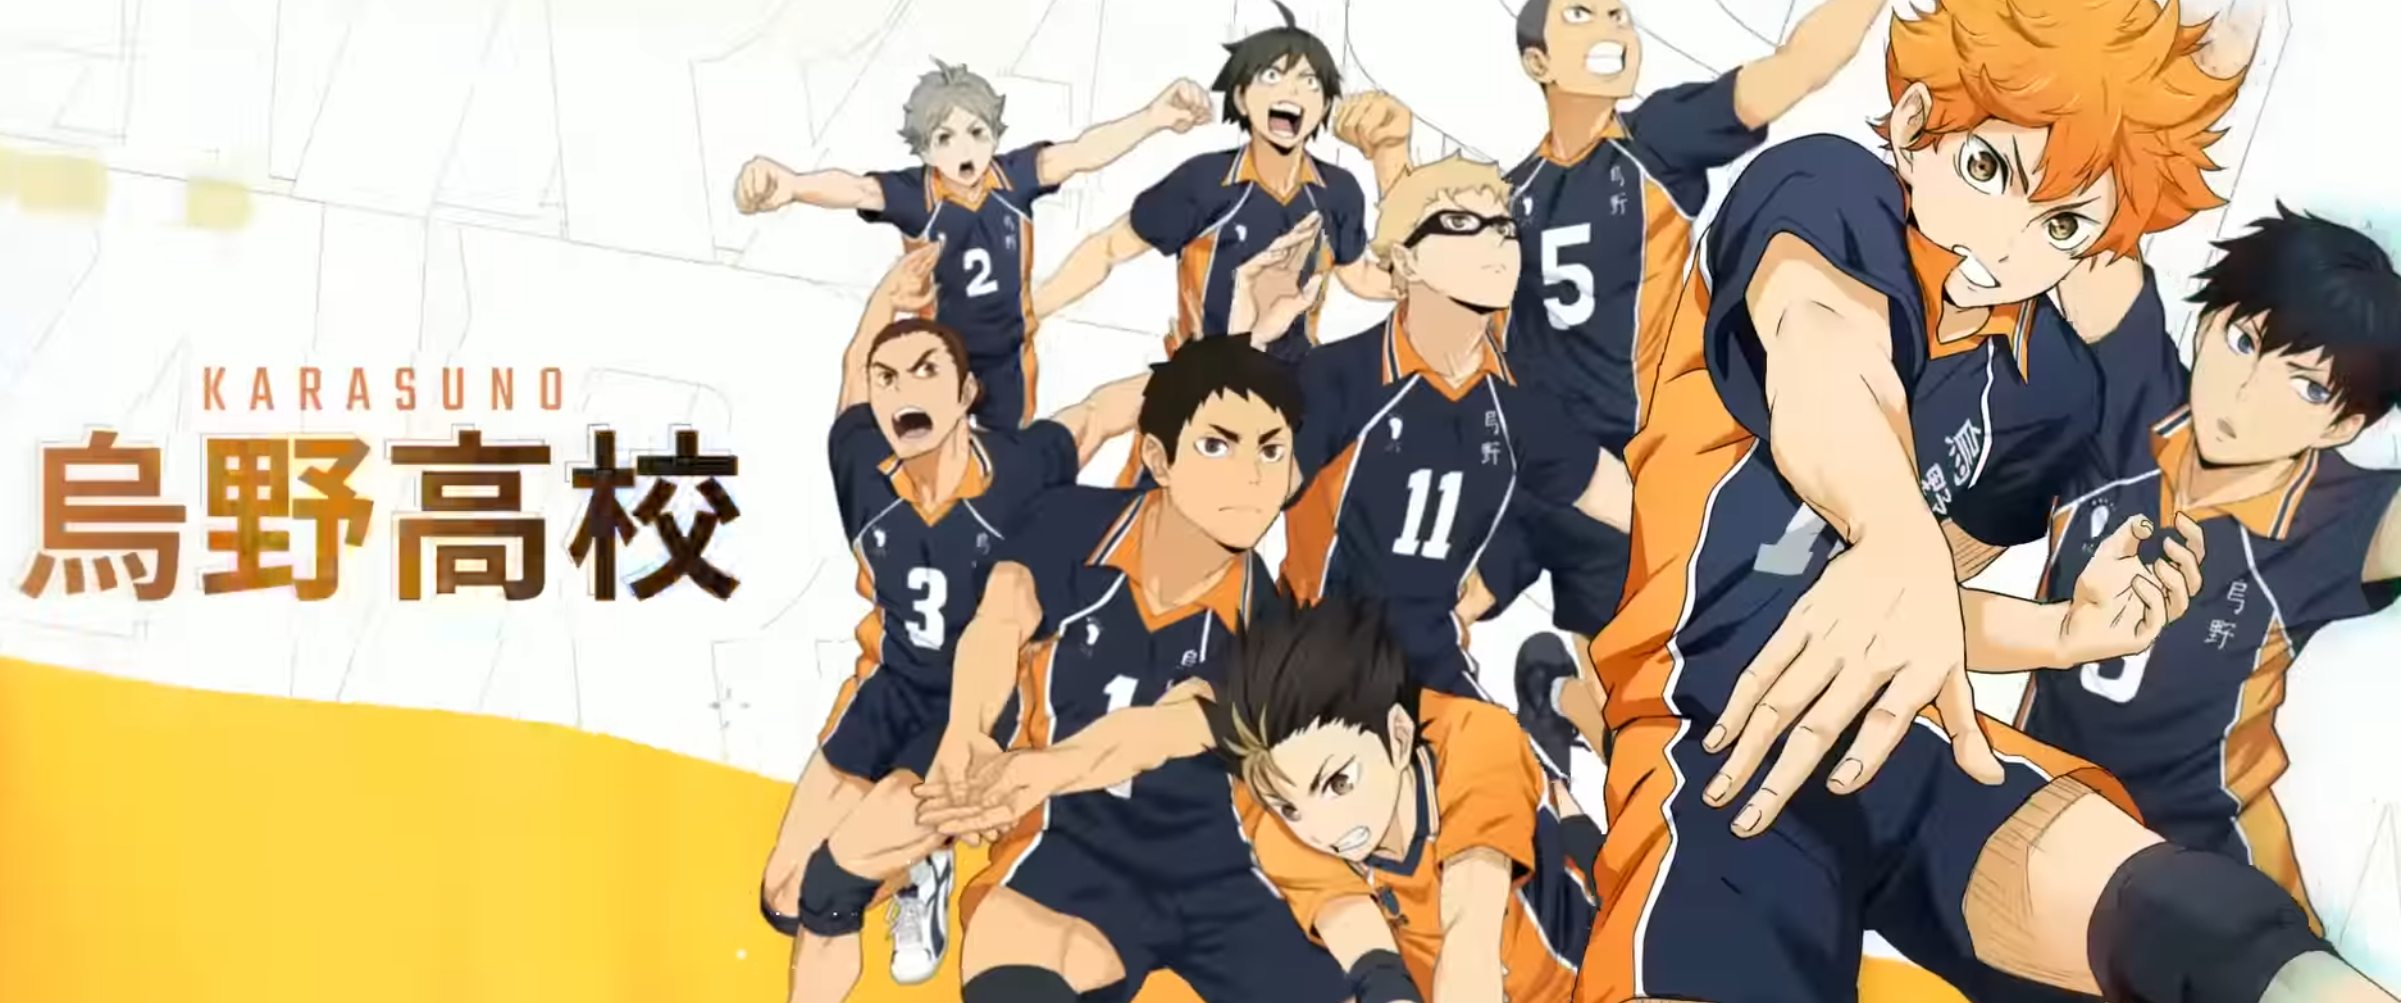 Haikyu!! Volleyball Mobile Game Coming in 2023 - Comic Years